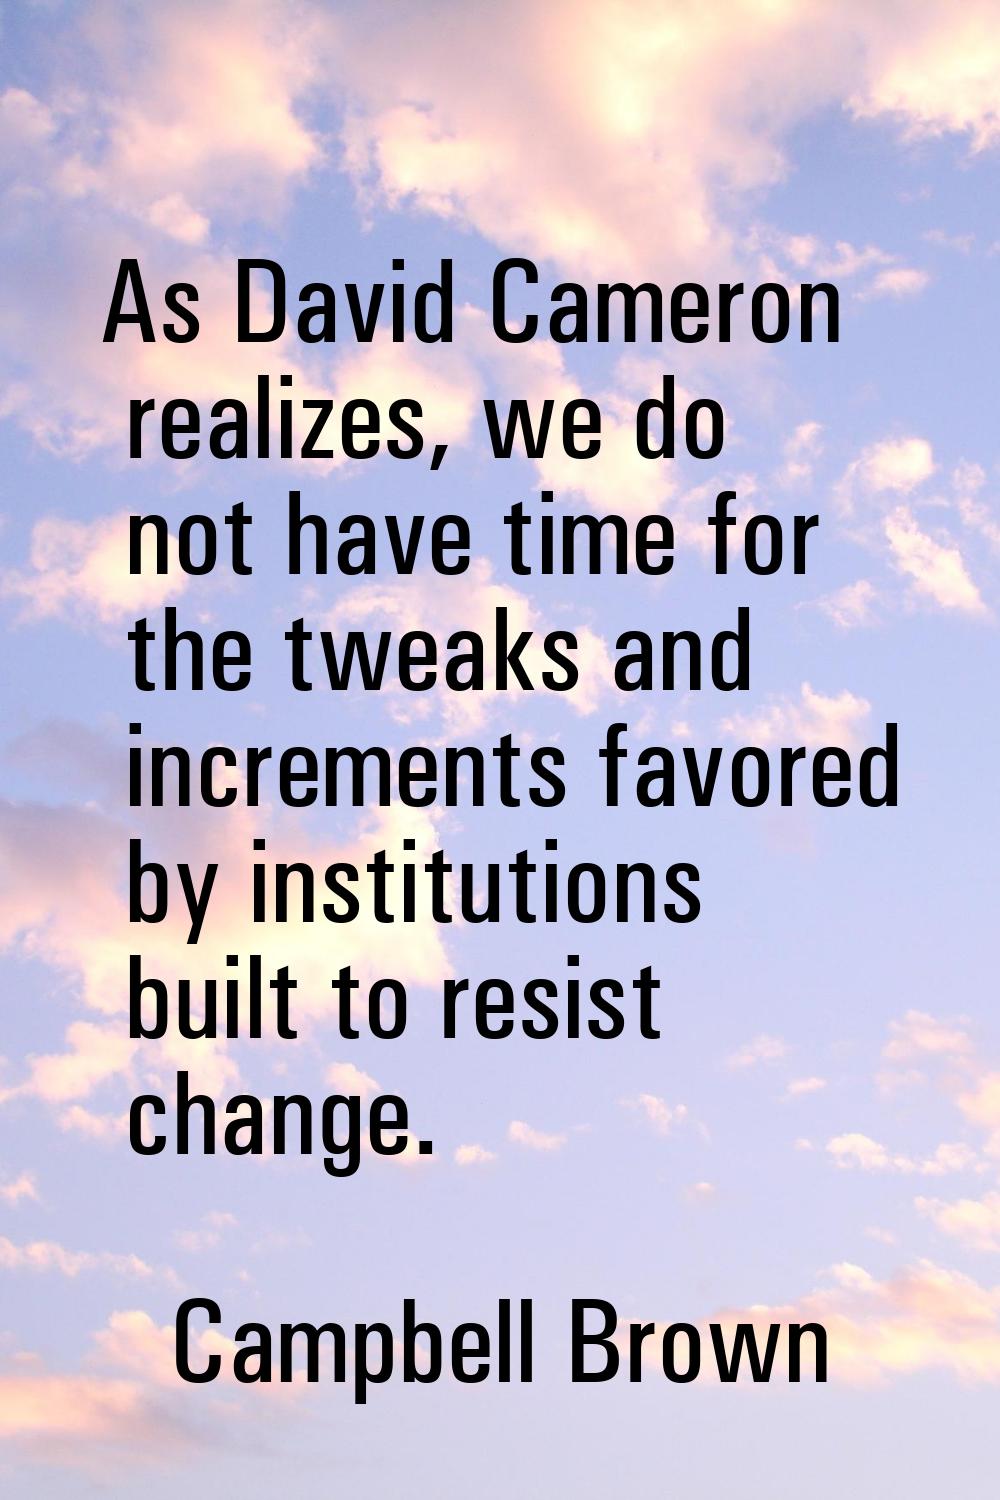 As David Cameron realizes, we do not have time for the tweaks and increments favored by institution